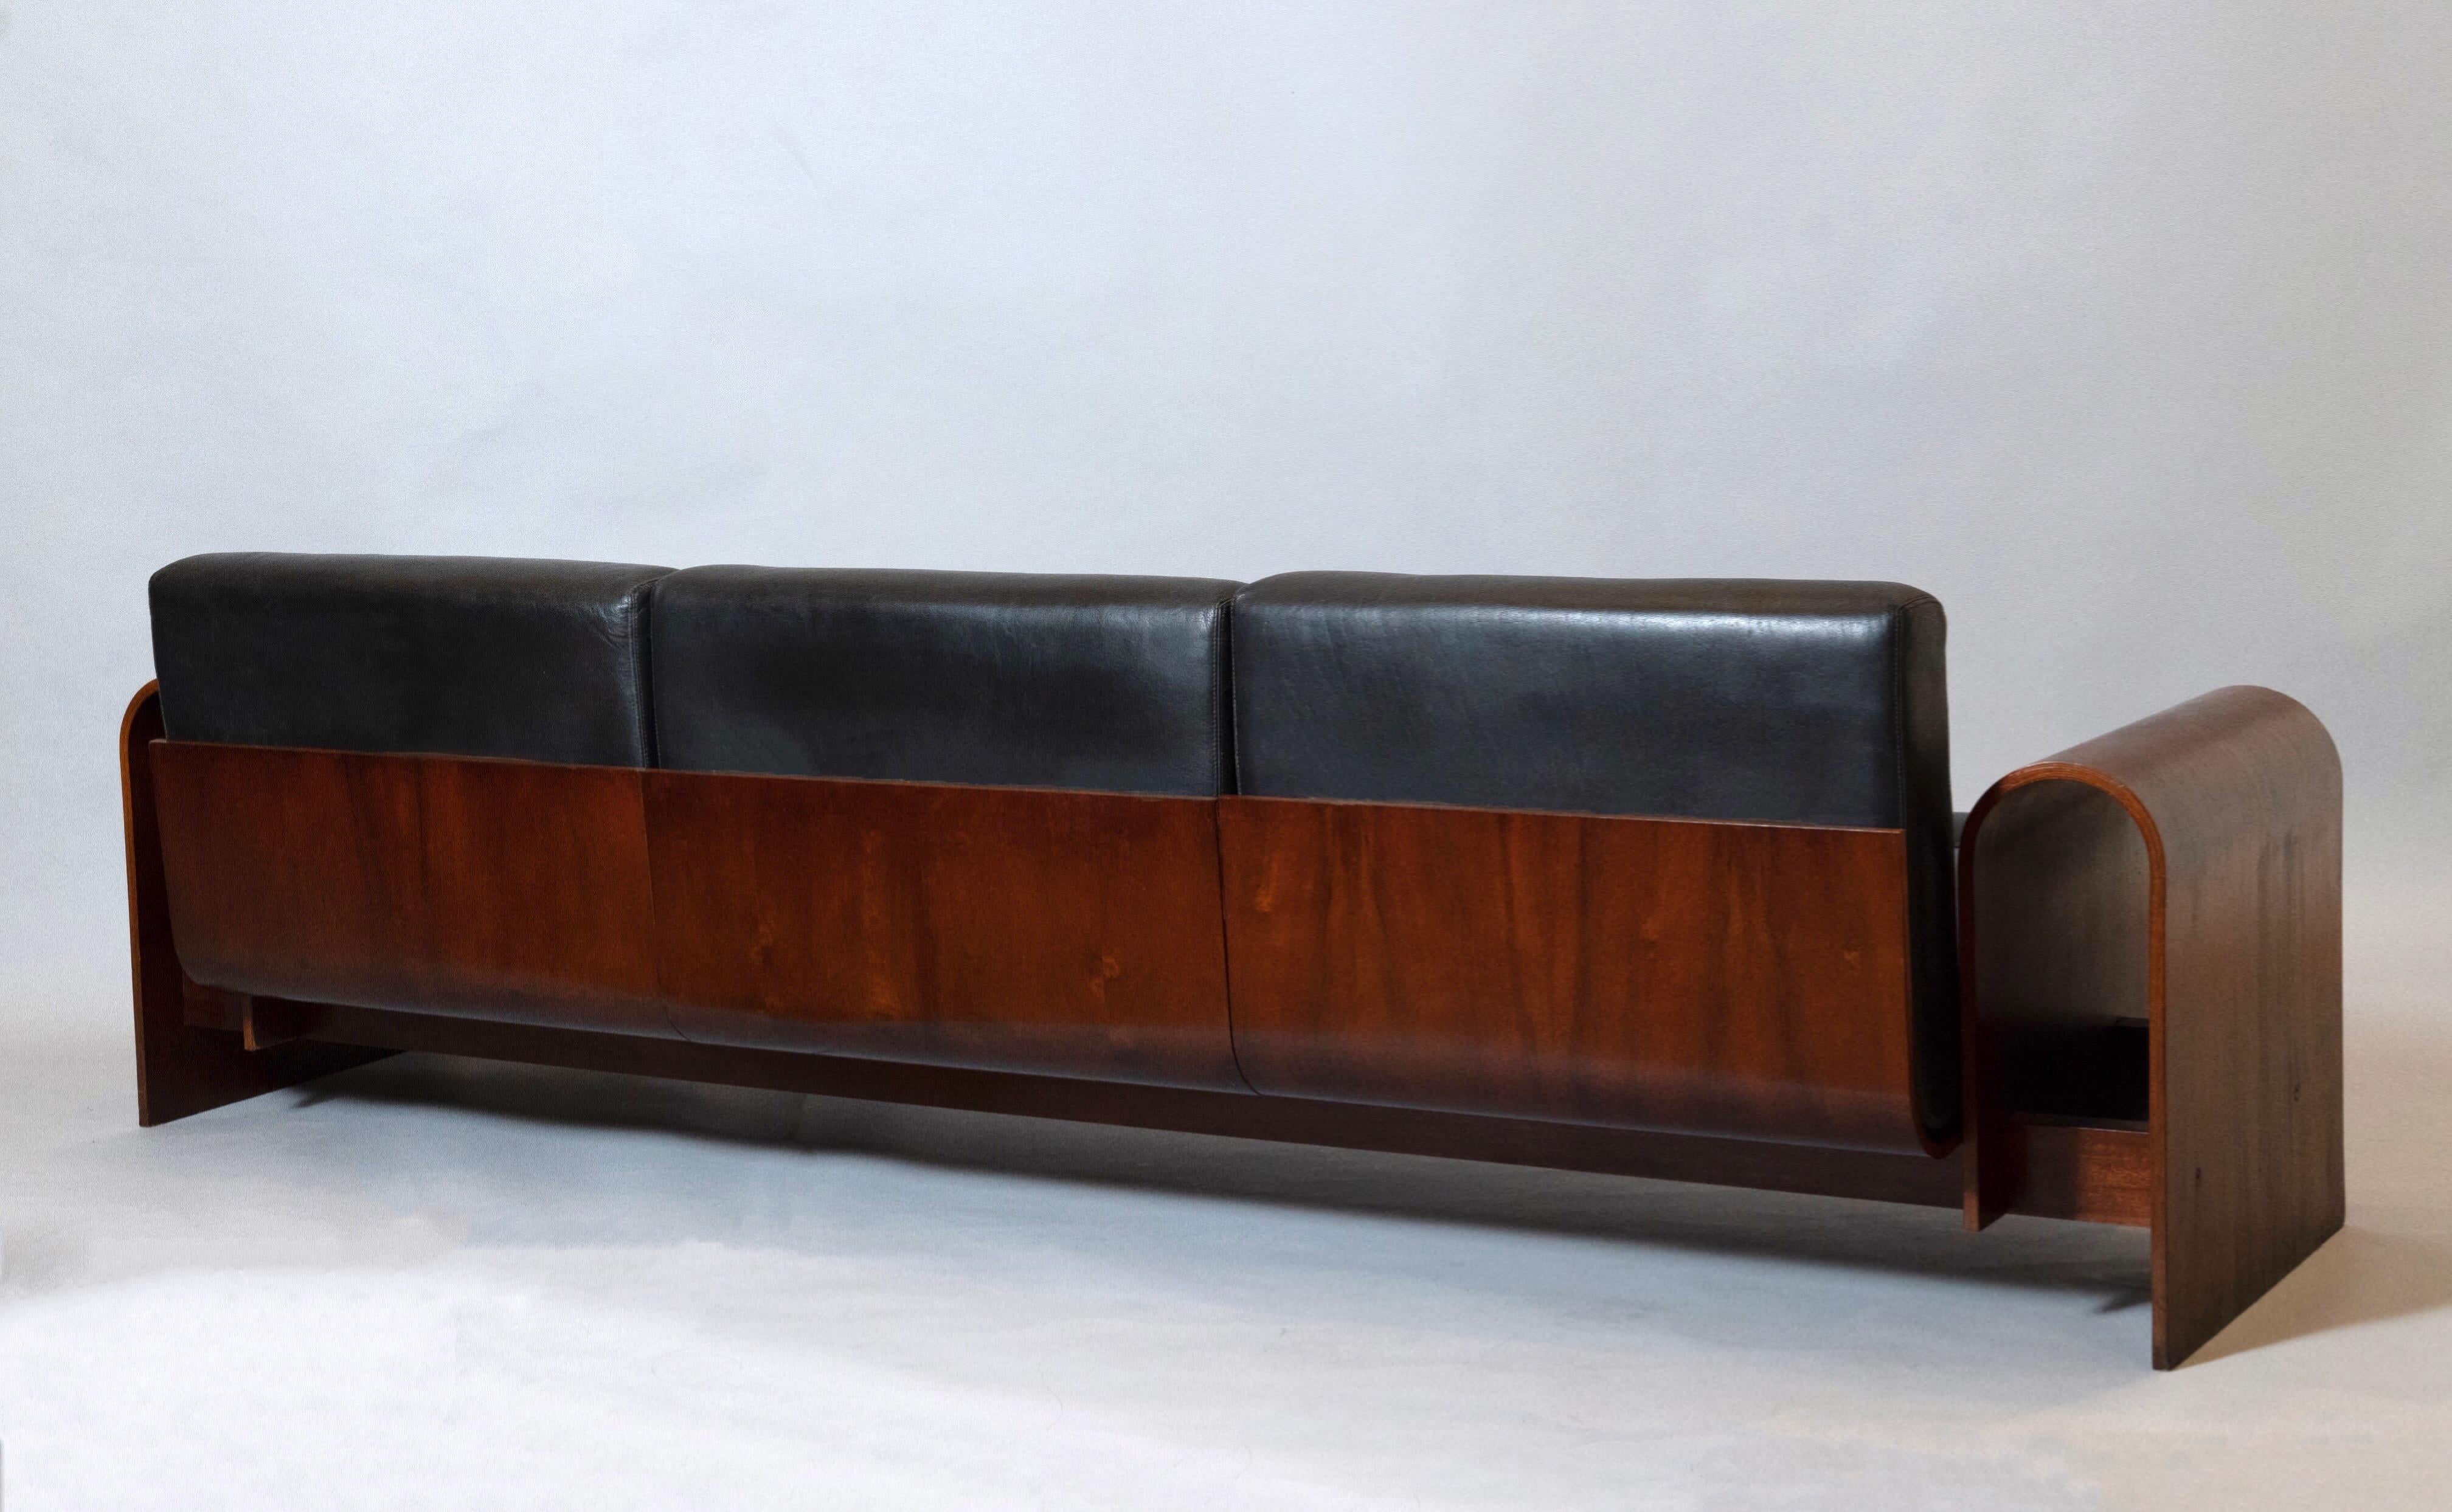 Oscar Niemeyer Exceptional Sofa in Rosewood and Leather, Hotel SESC, Brazil 1990 1